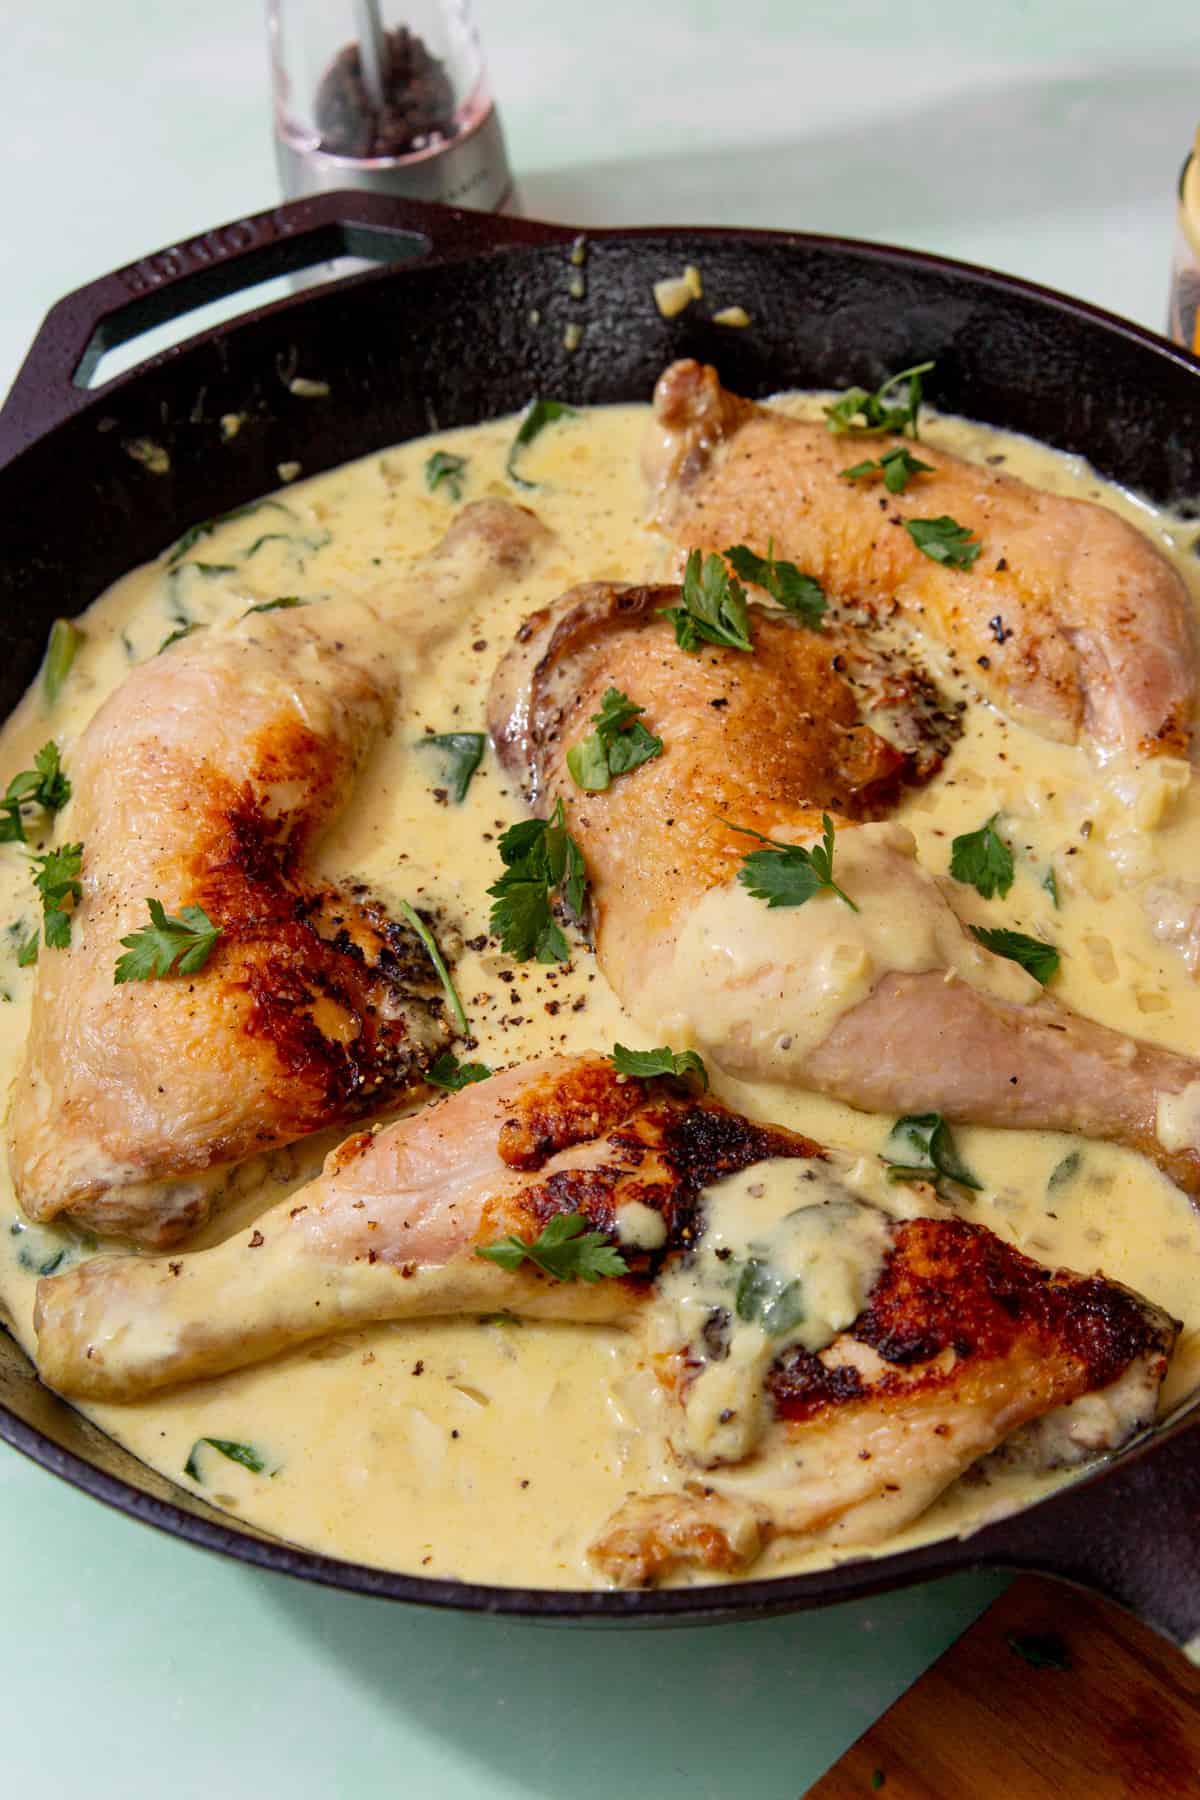 4 golden browned chicken legs with skins in a skillet pan in a creamy sauce topped with fresh parsley.